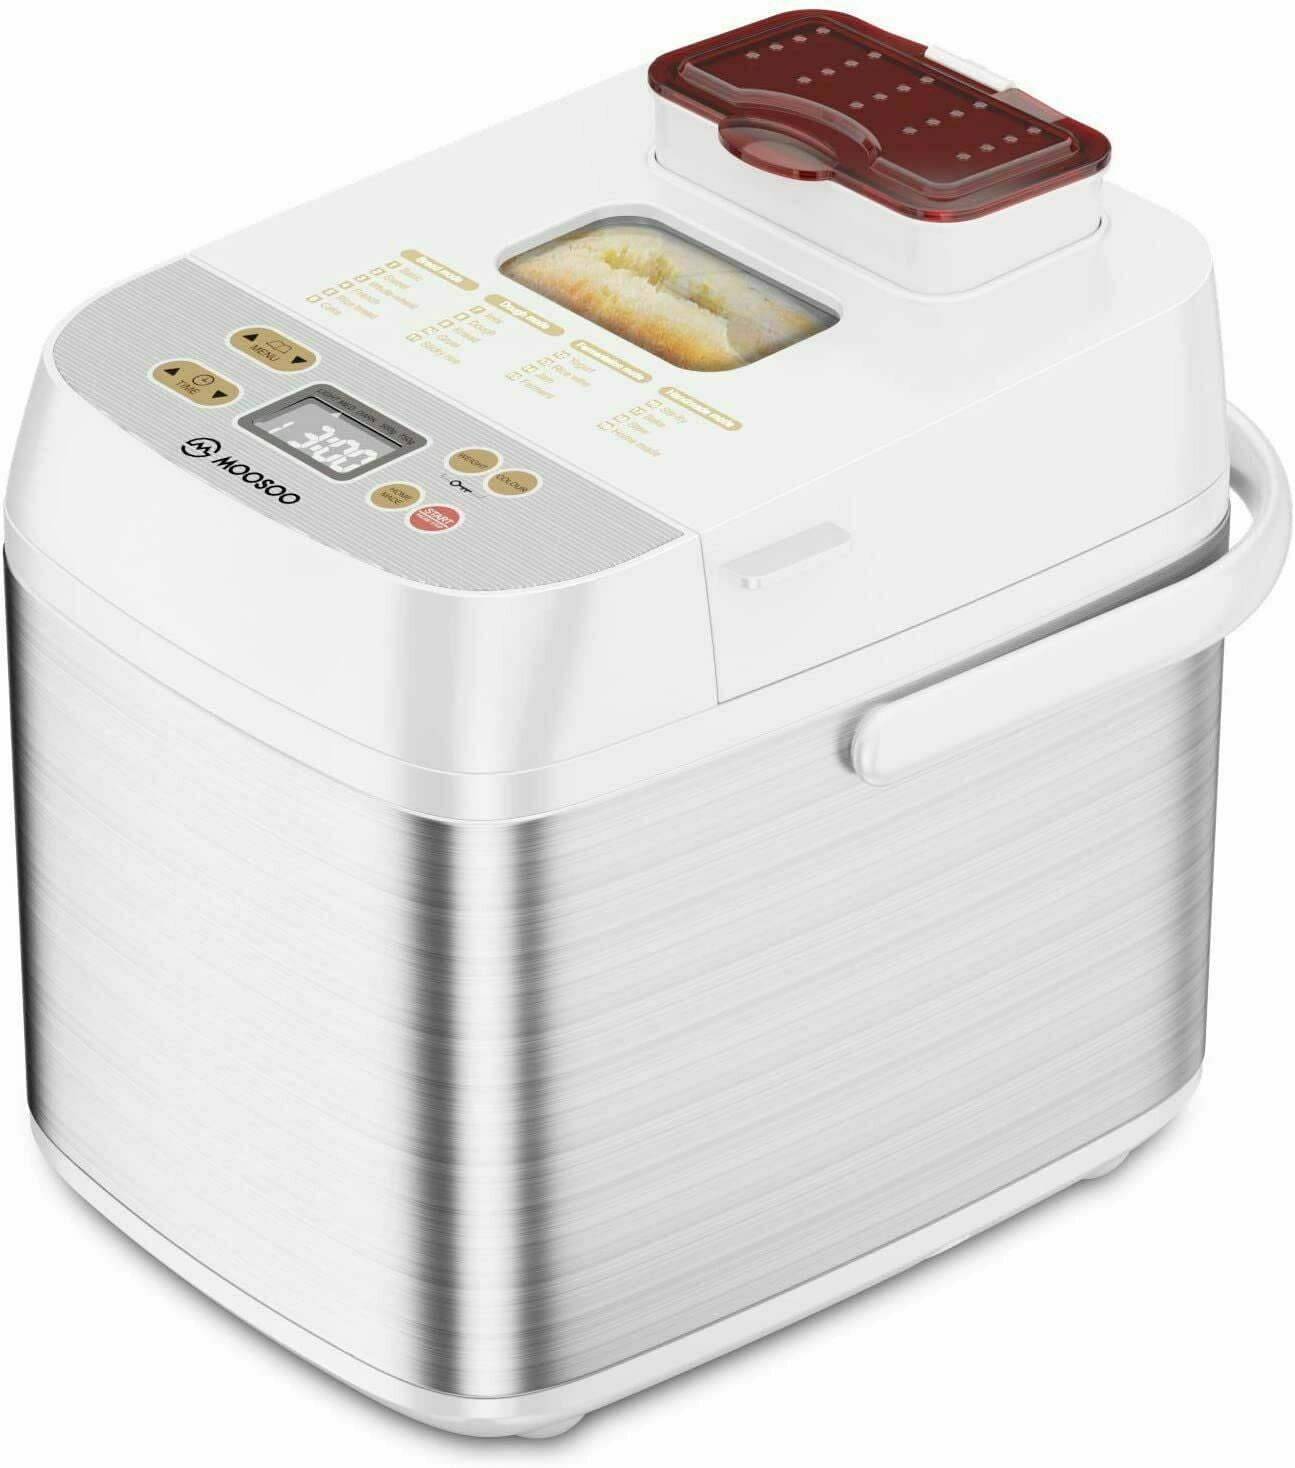 Score This Editor-Loved Cuisinart Bread Maker for 30% Off